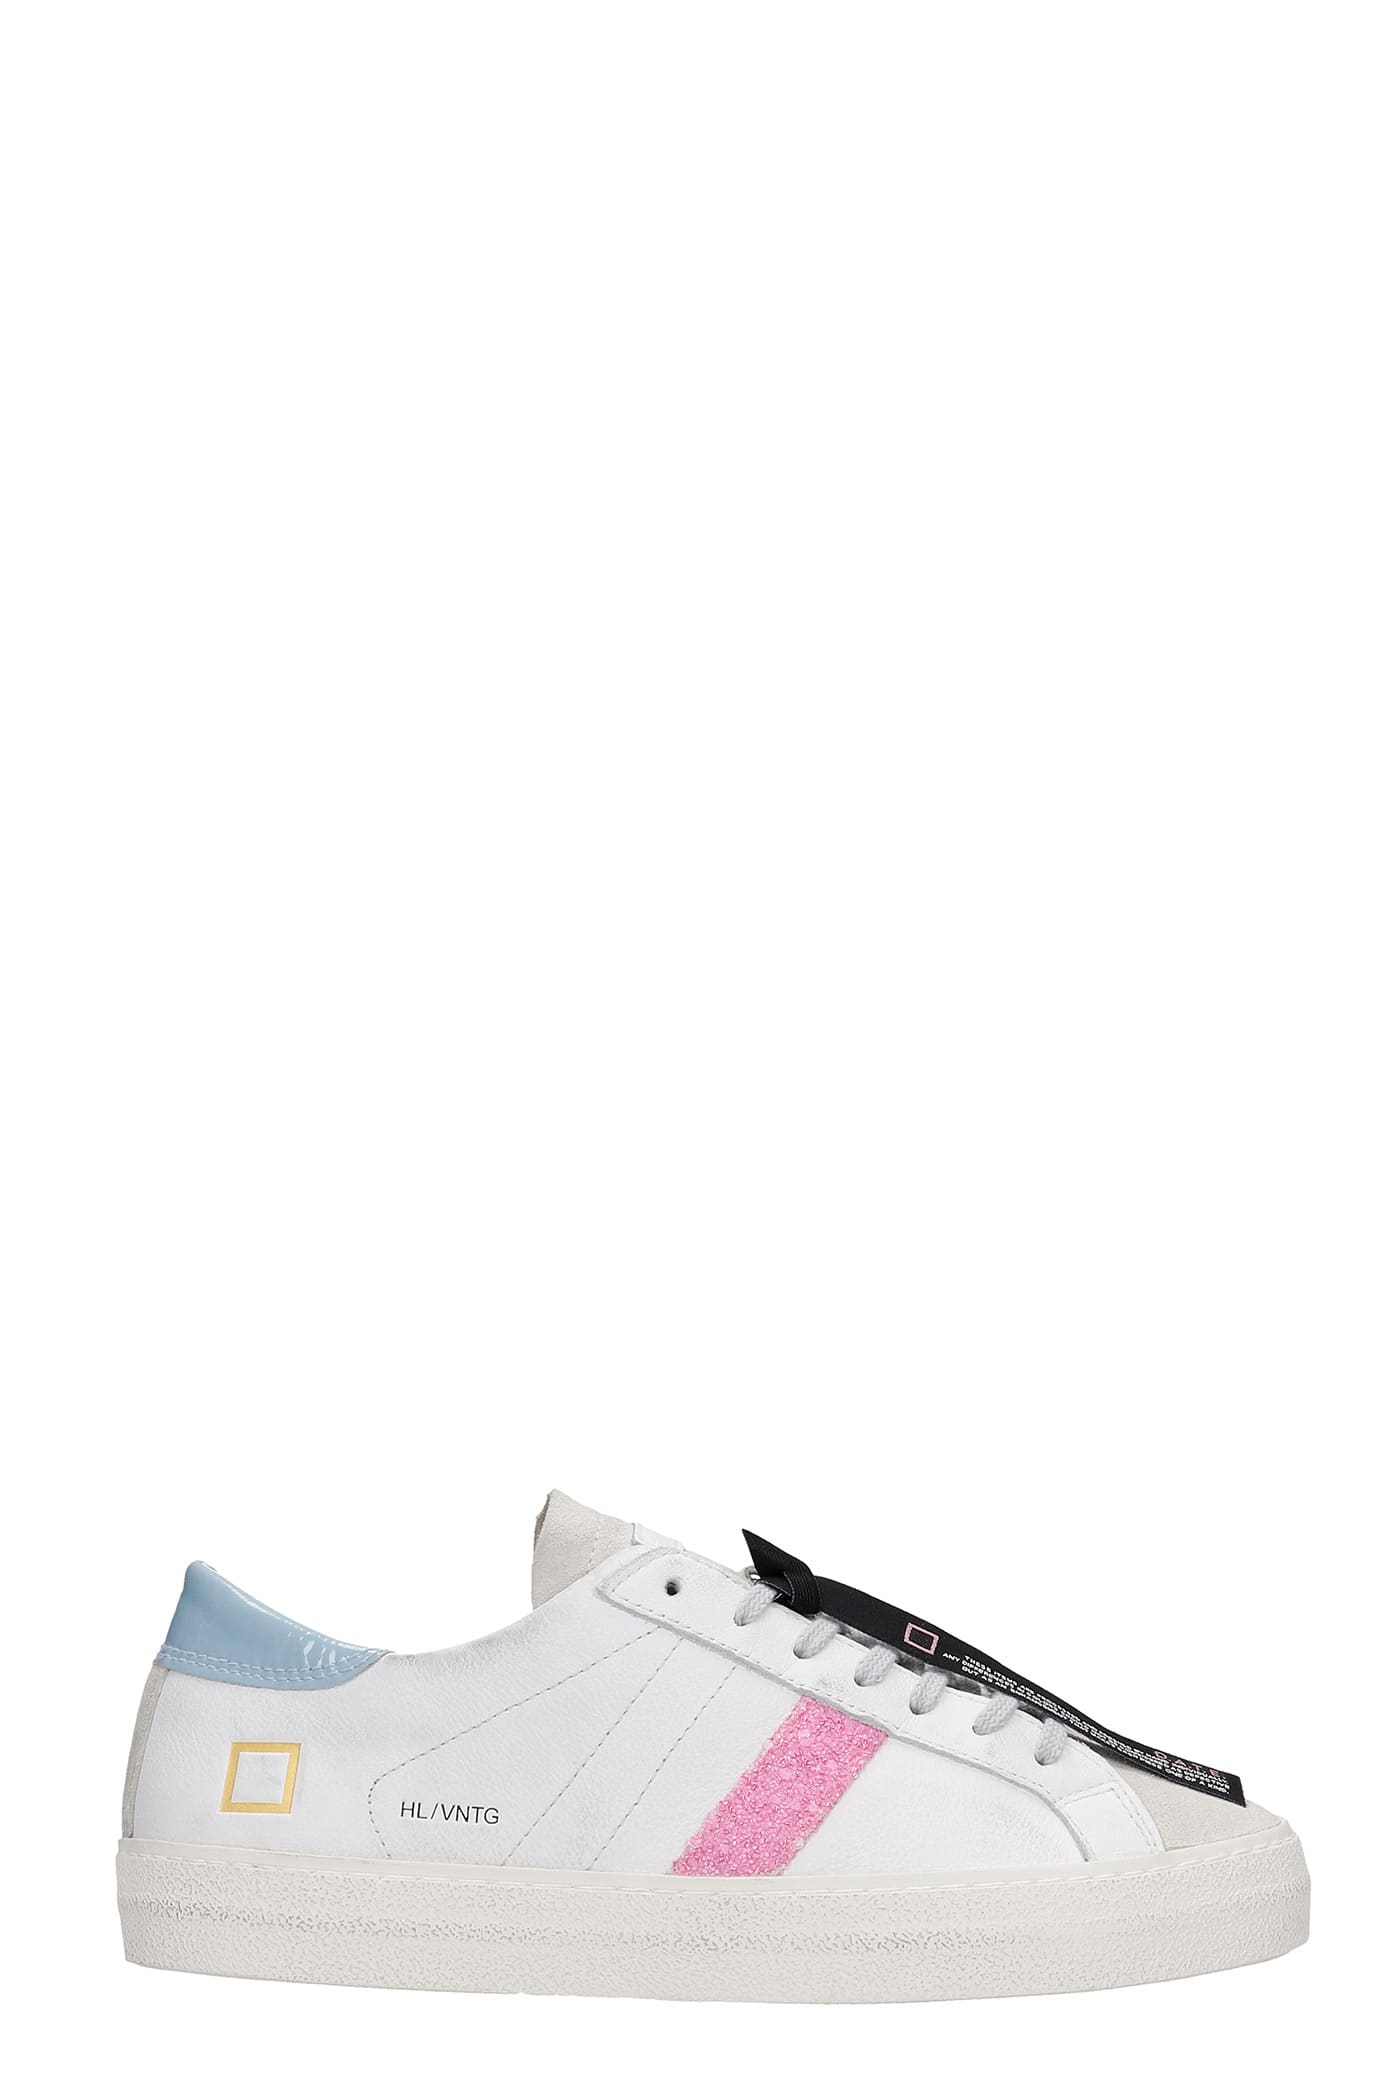 DATE HILL LOW SNEAKERS IN WHITE LEATHER,W341HLVCWK